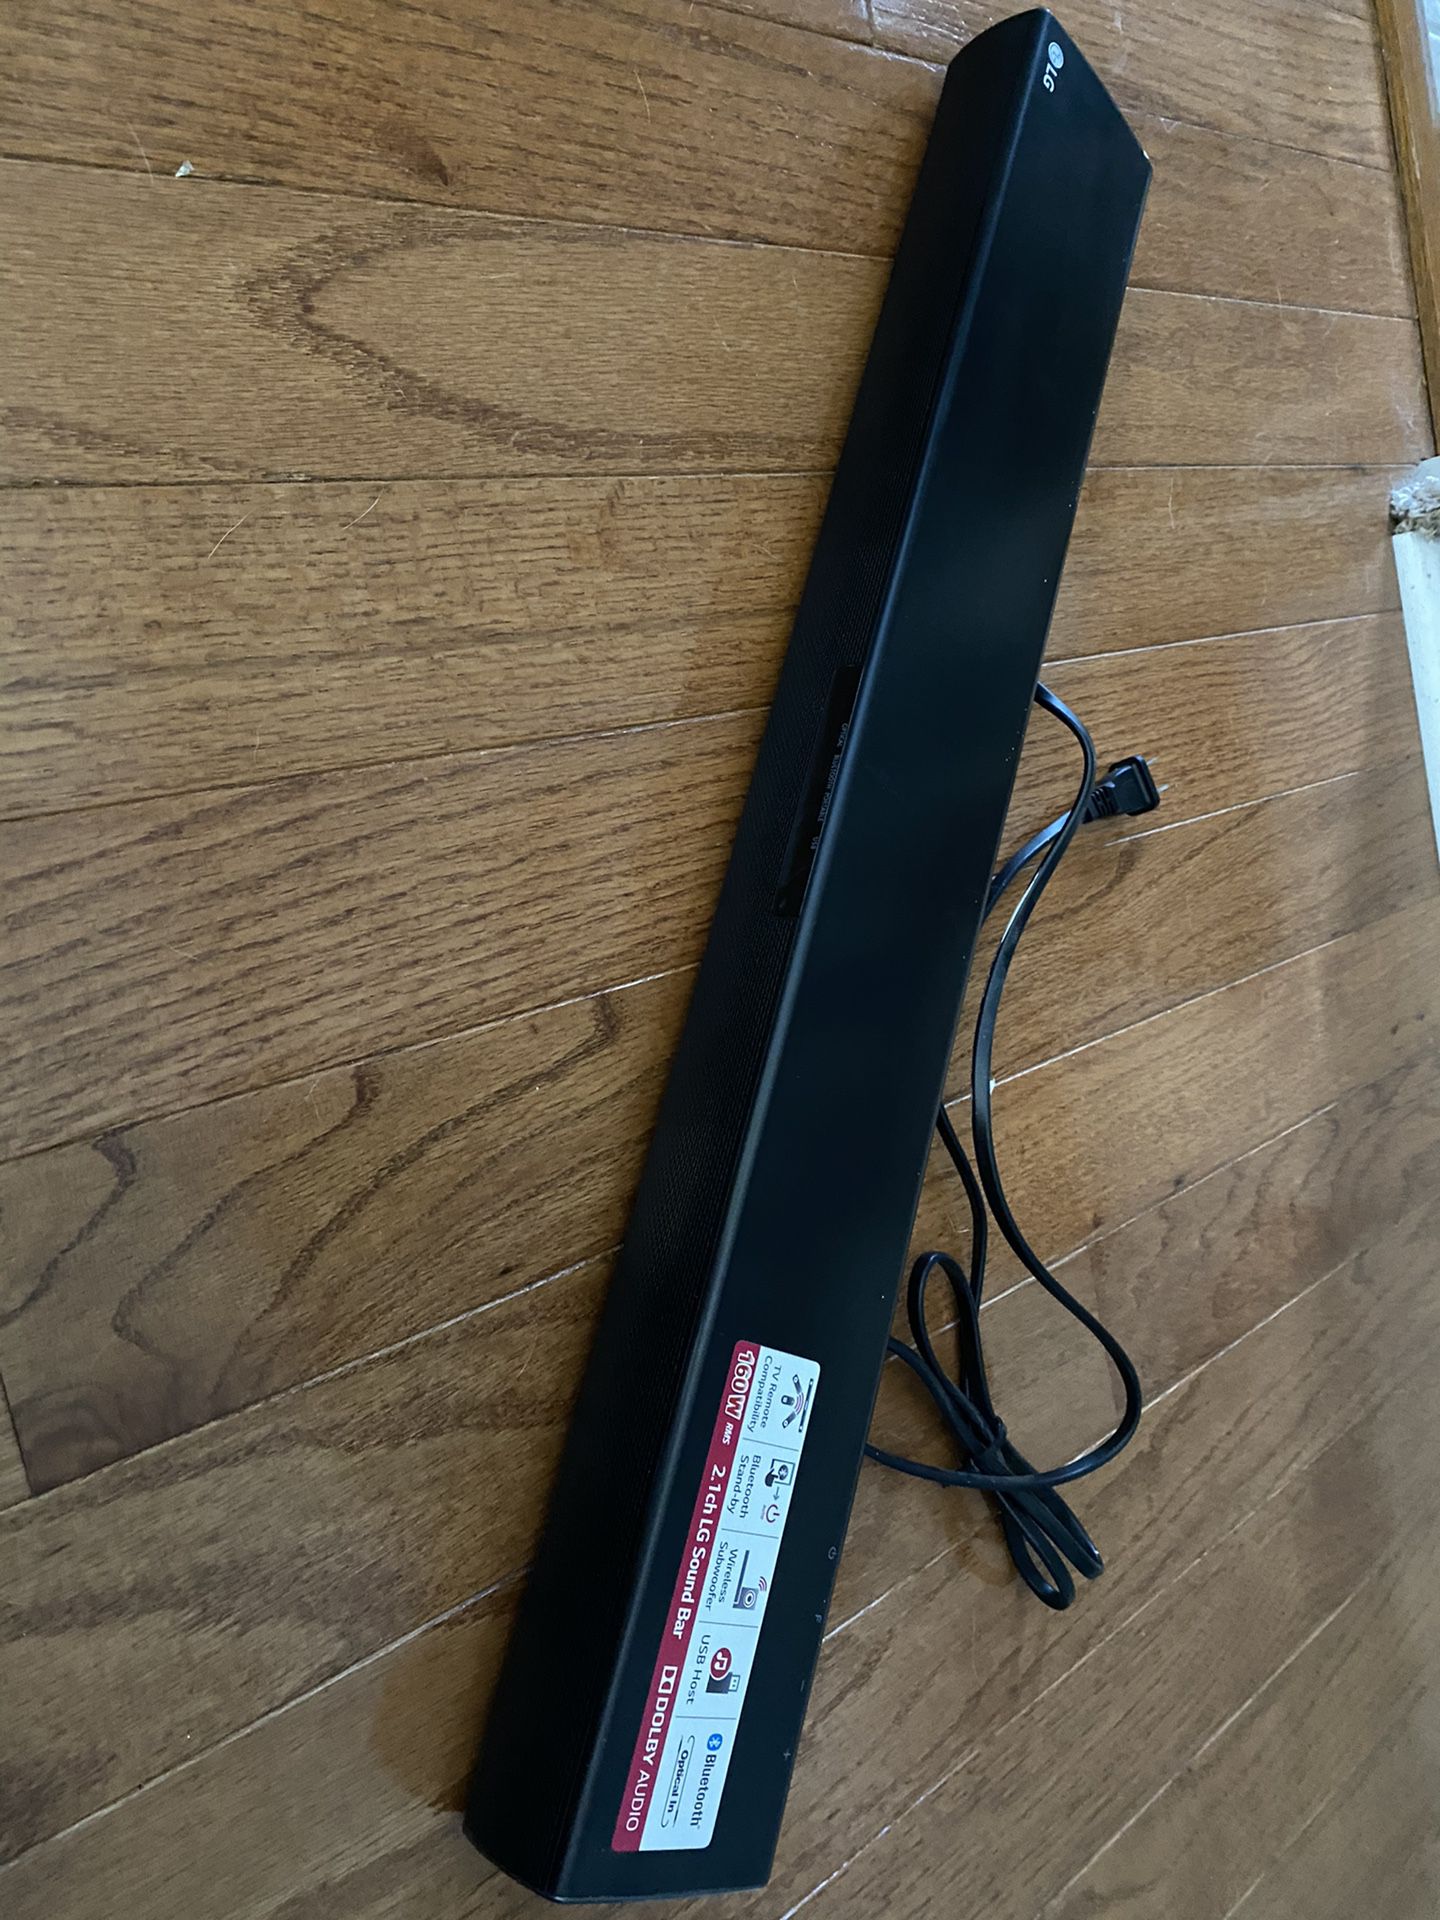 LG Sound Bar and Wireless Sub Woofer